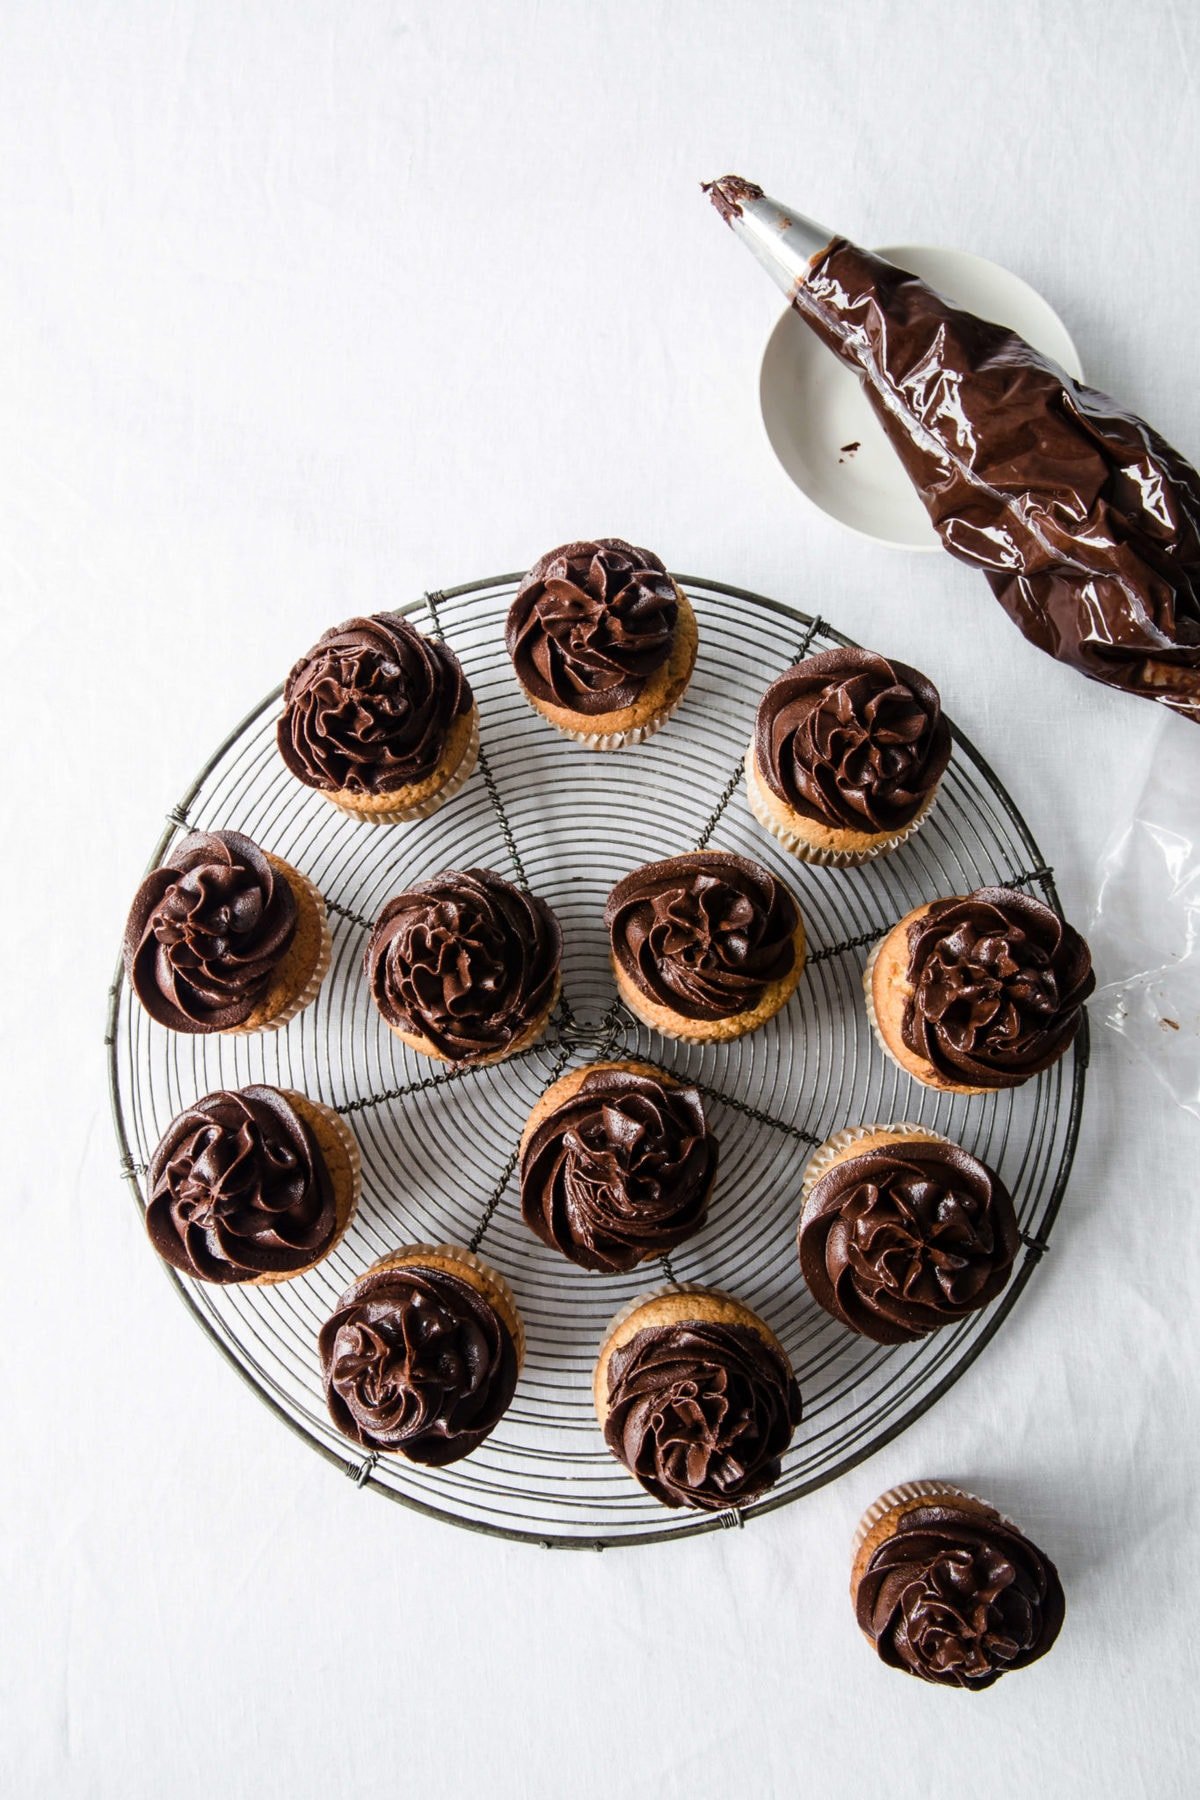 Chocolate frosting on vanilla cupcakes - plated on a cooling rack